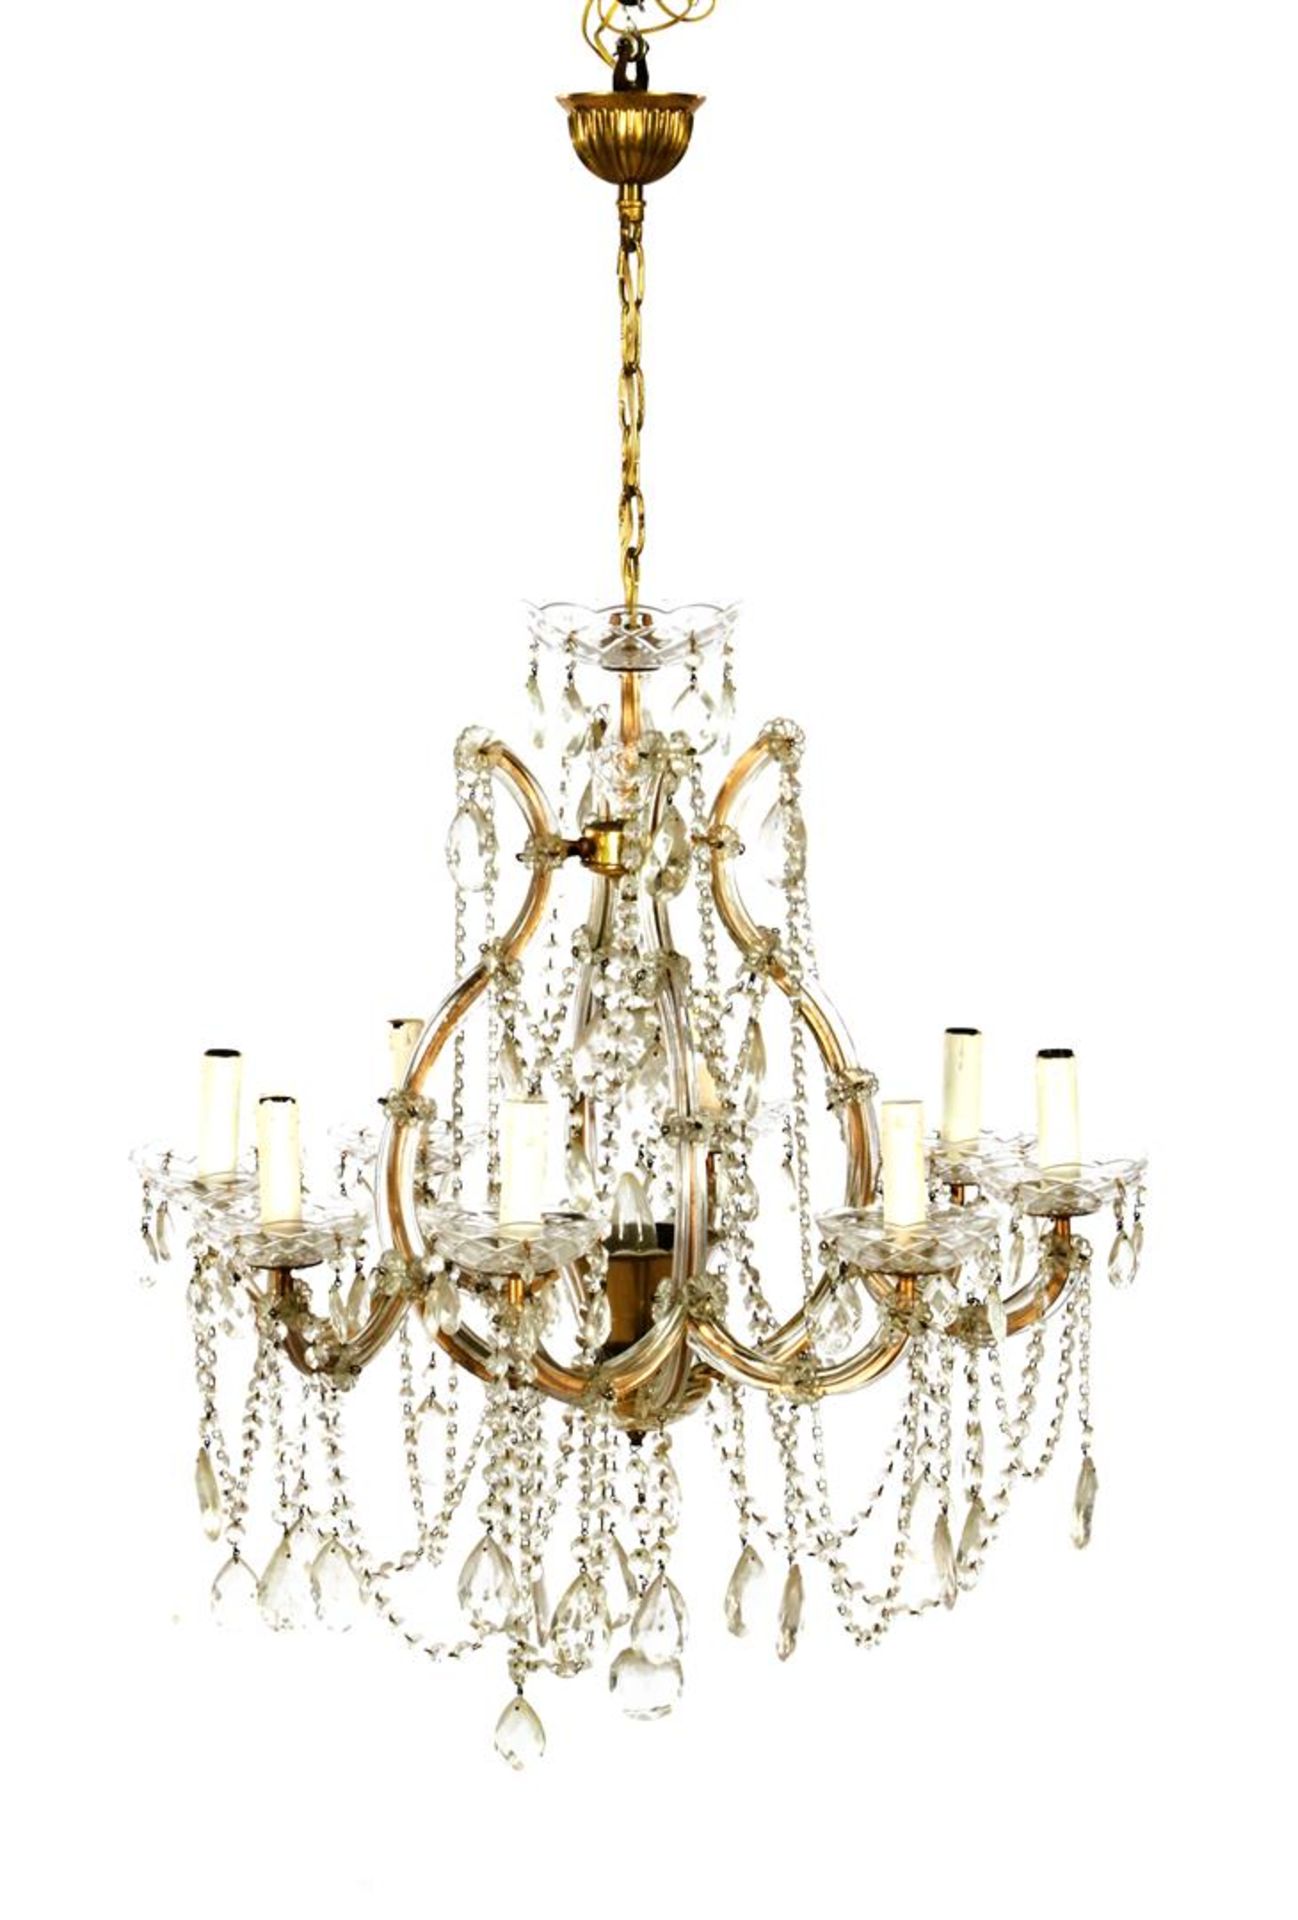 Classic 8-armed and 9-light crystal chandelier